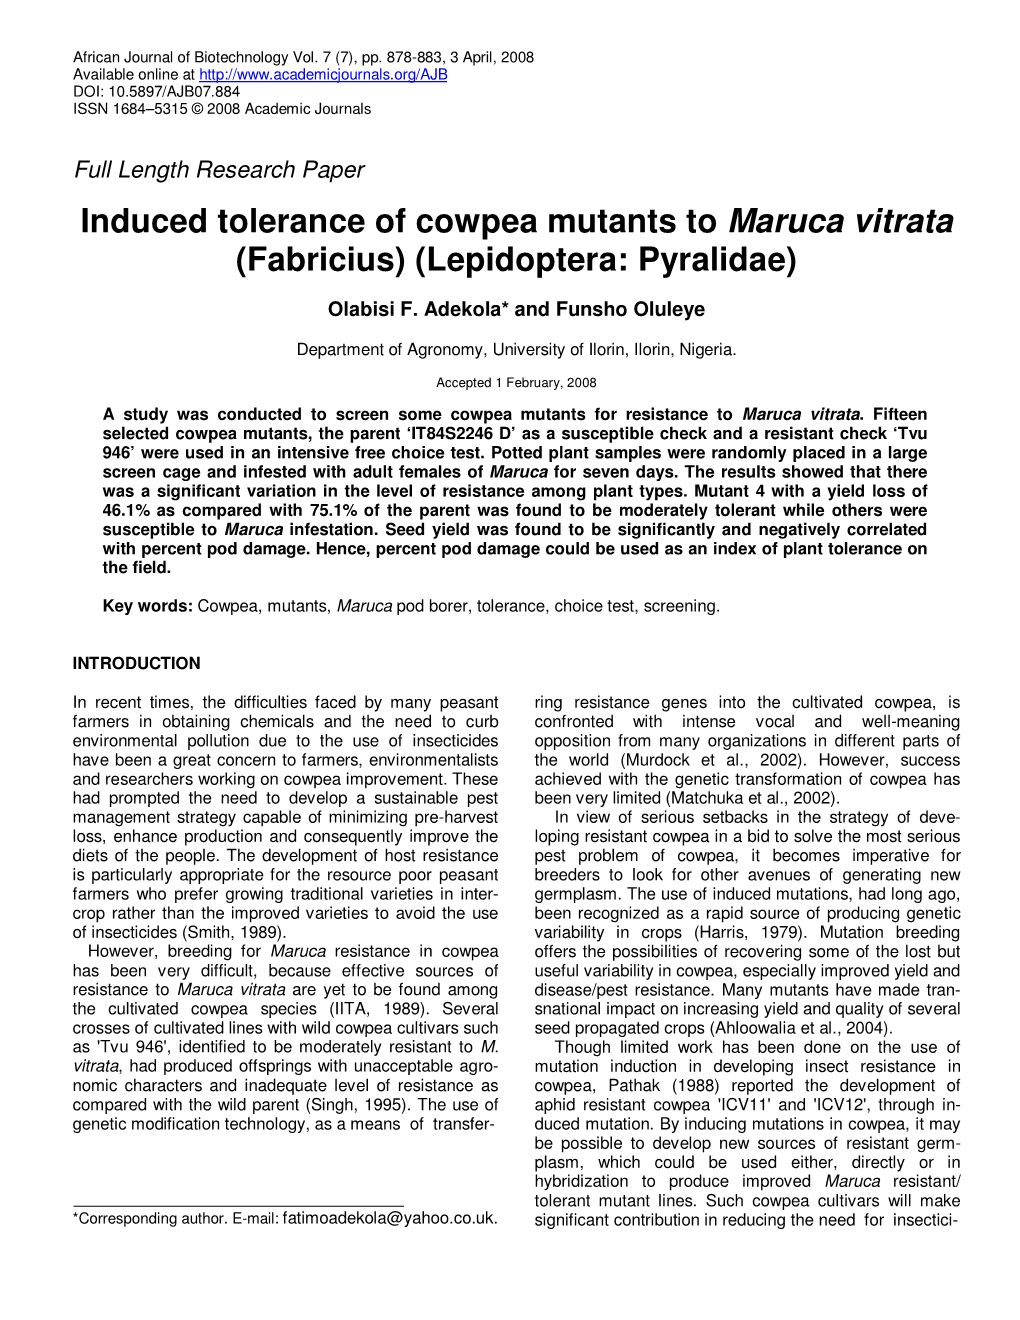 Induced Tolerance of Cowpea Mutants to Maruca Vitrata (Fabricius) (Lepidoptera: Pyralidae)